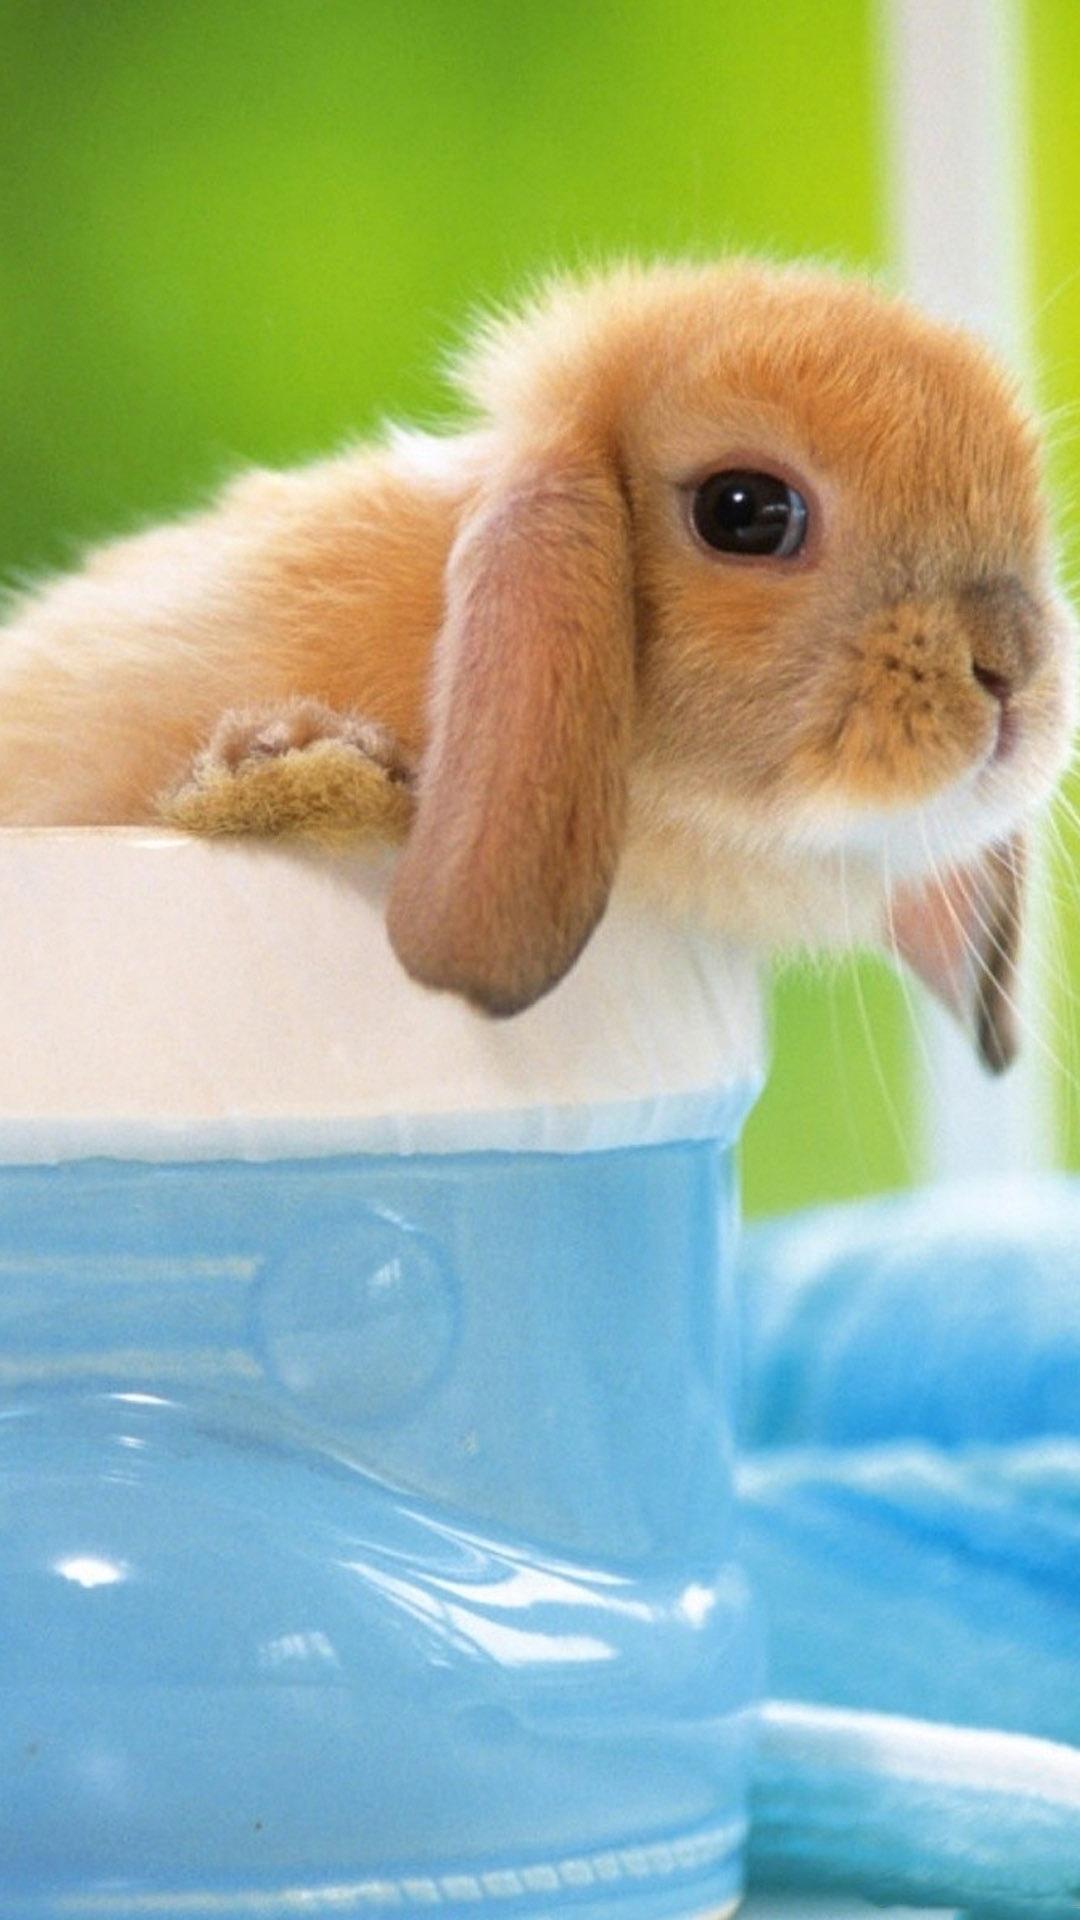 Cute Bunny Android Wallpaper free download